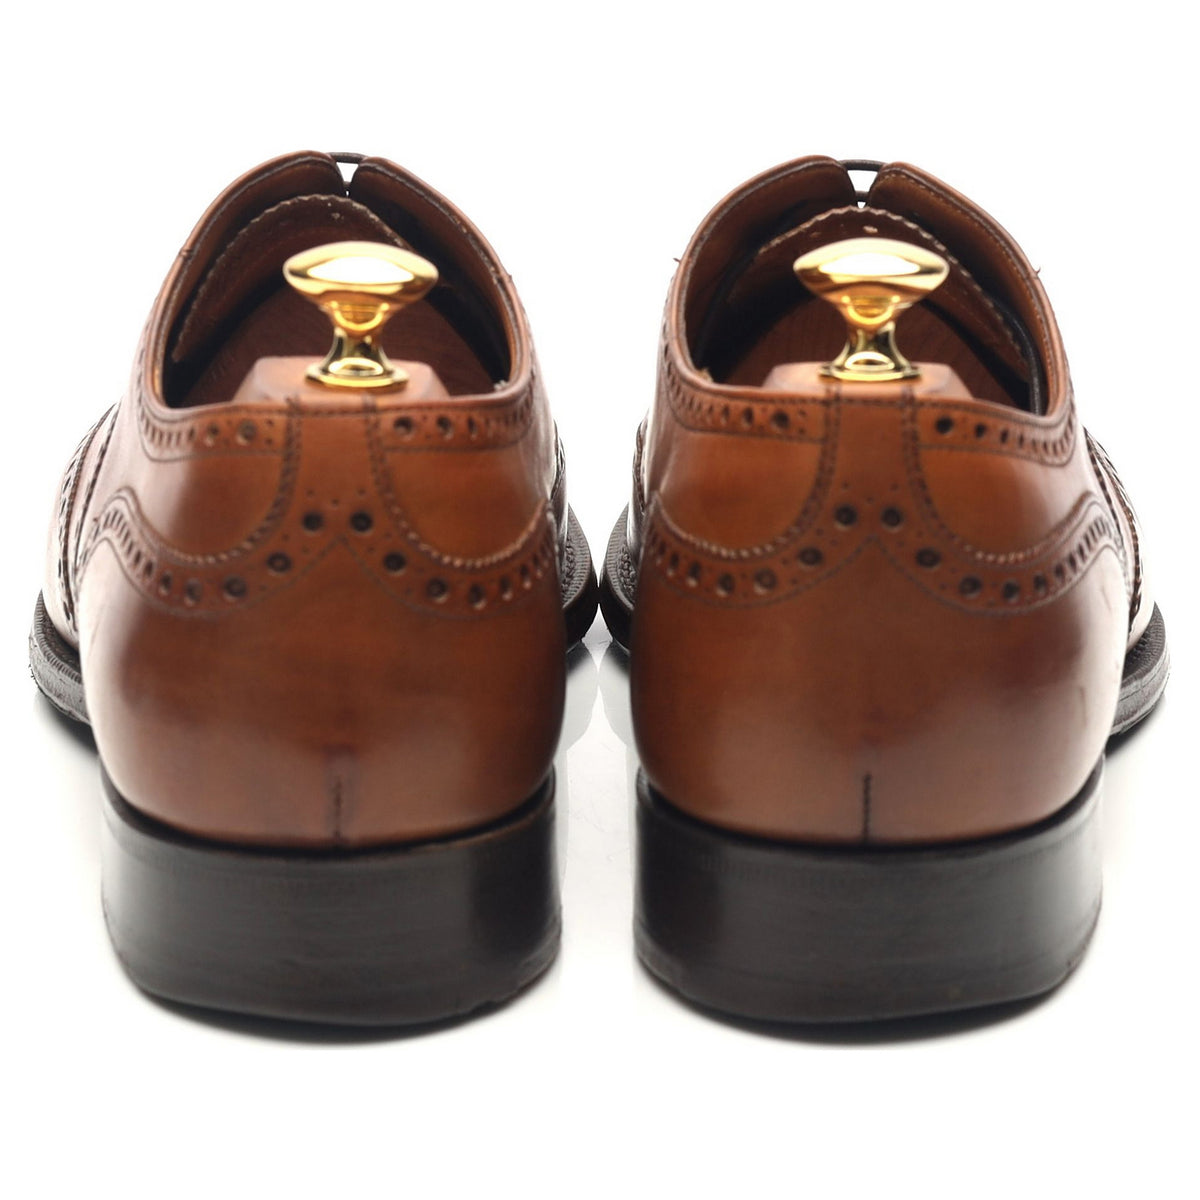 &#39;Chetwynd&#39; Tan Brown Leather Brogues UK 9 G